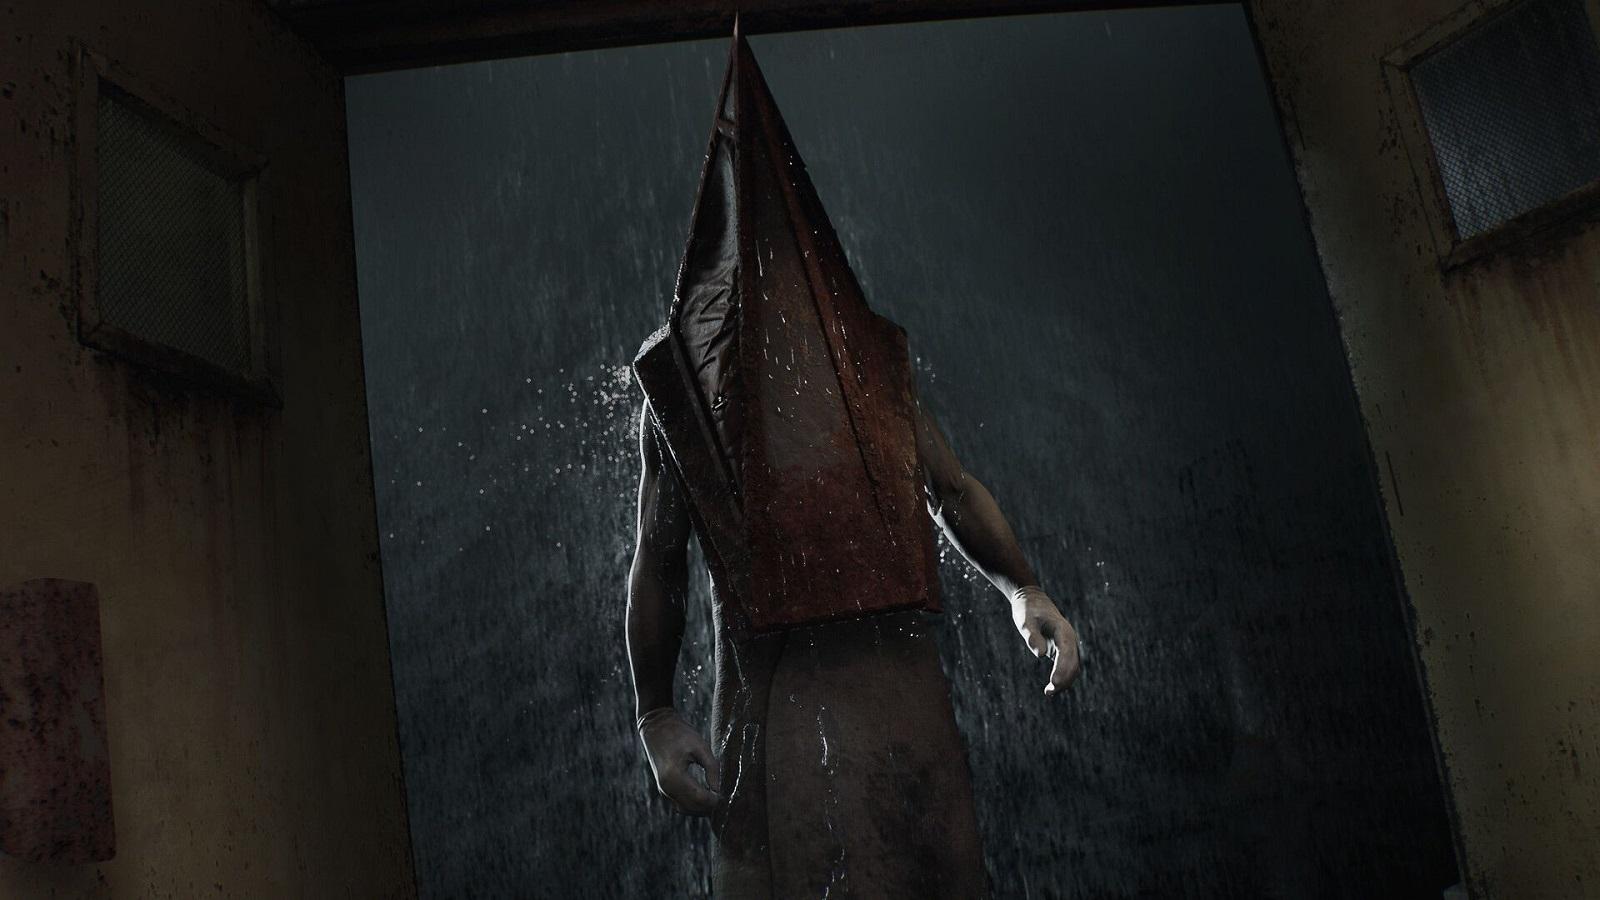 Silent Hill: Ascension - All 6 Character Posters Officially Revealed